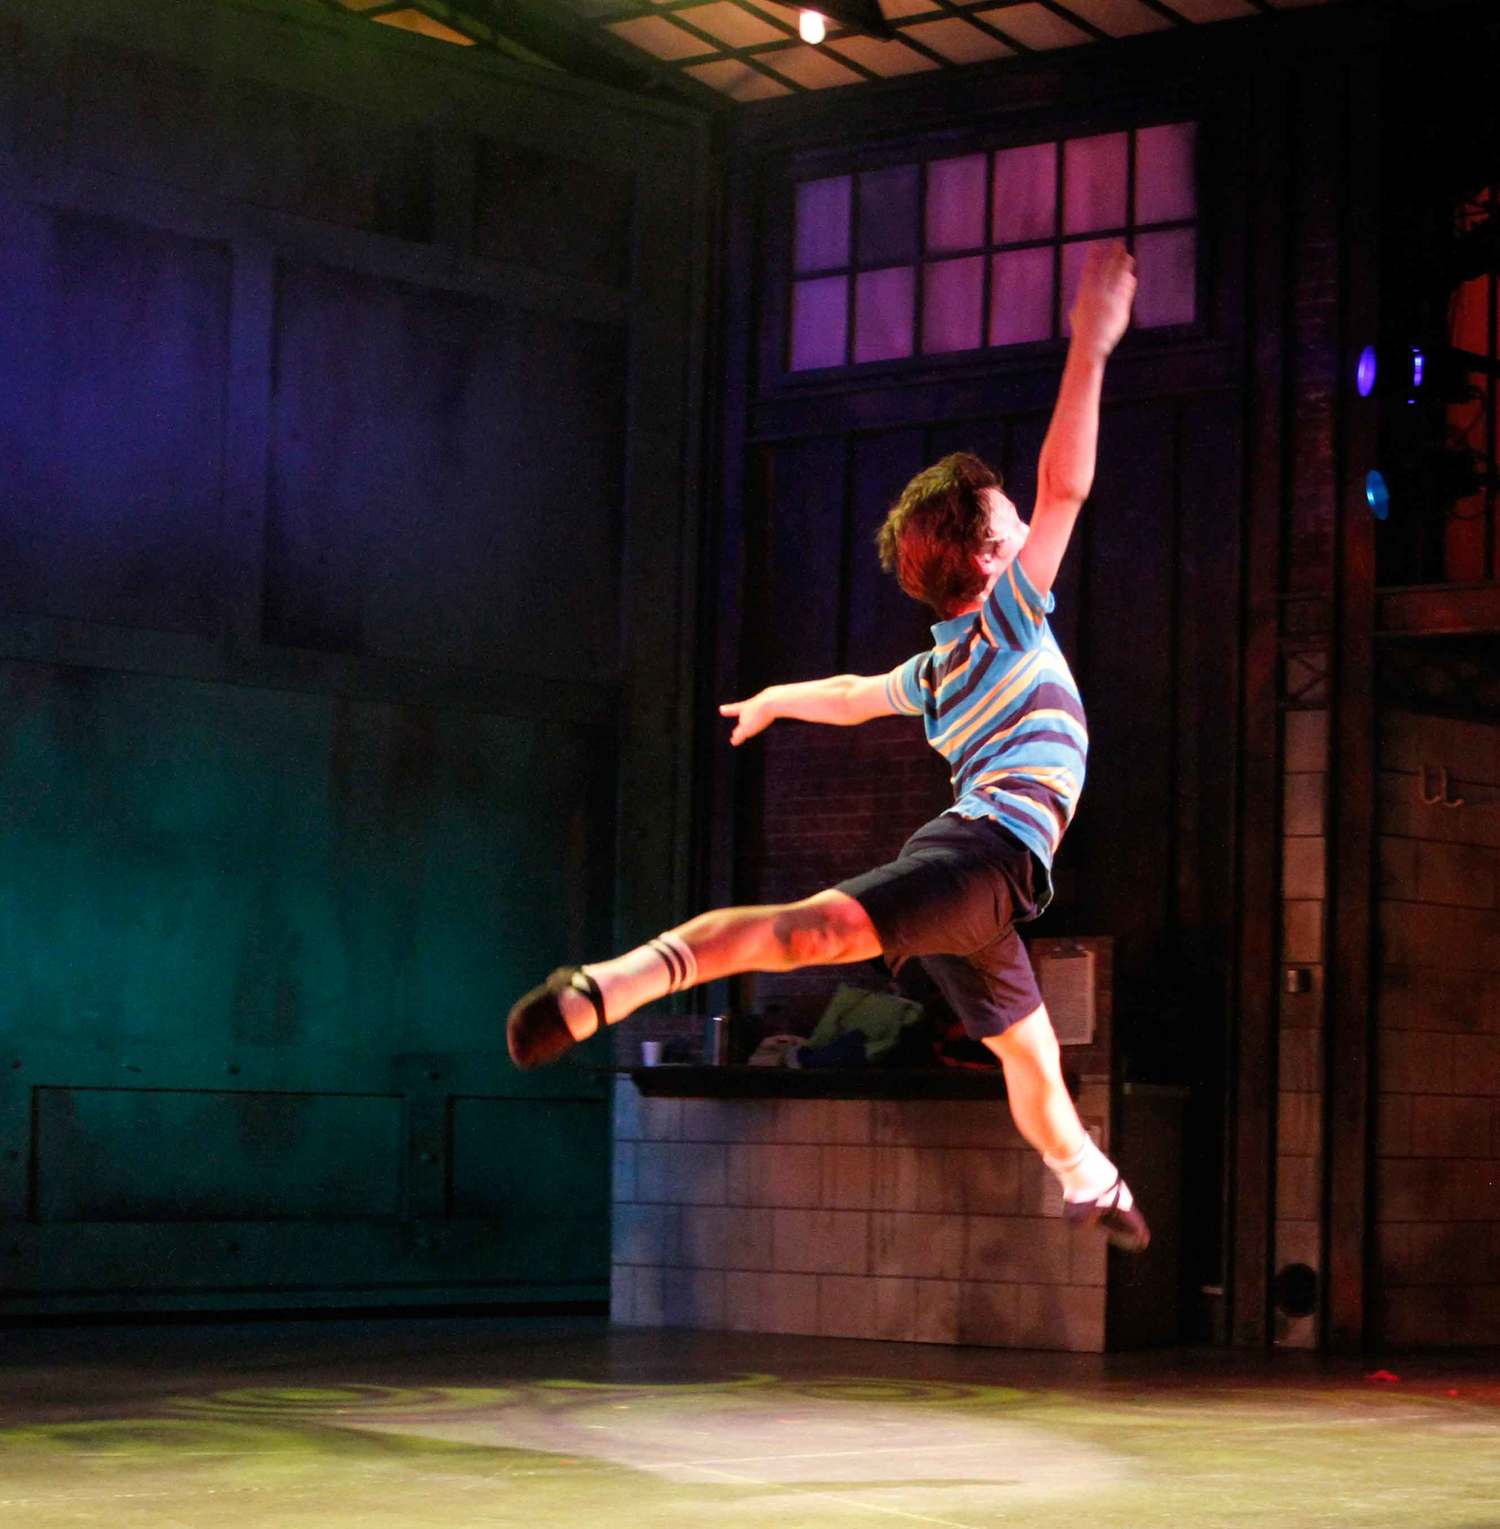 Billy leaps to new heights in this production!
-Reg Madison Photography 1